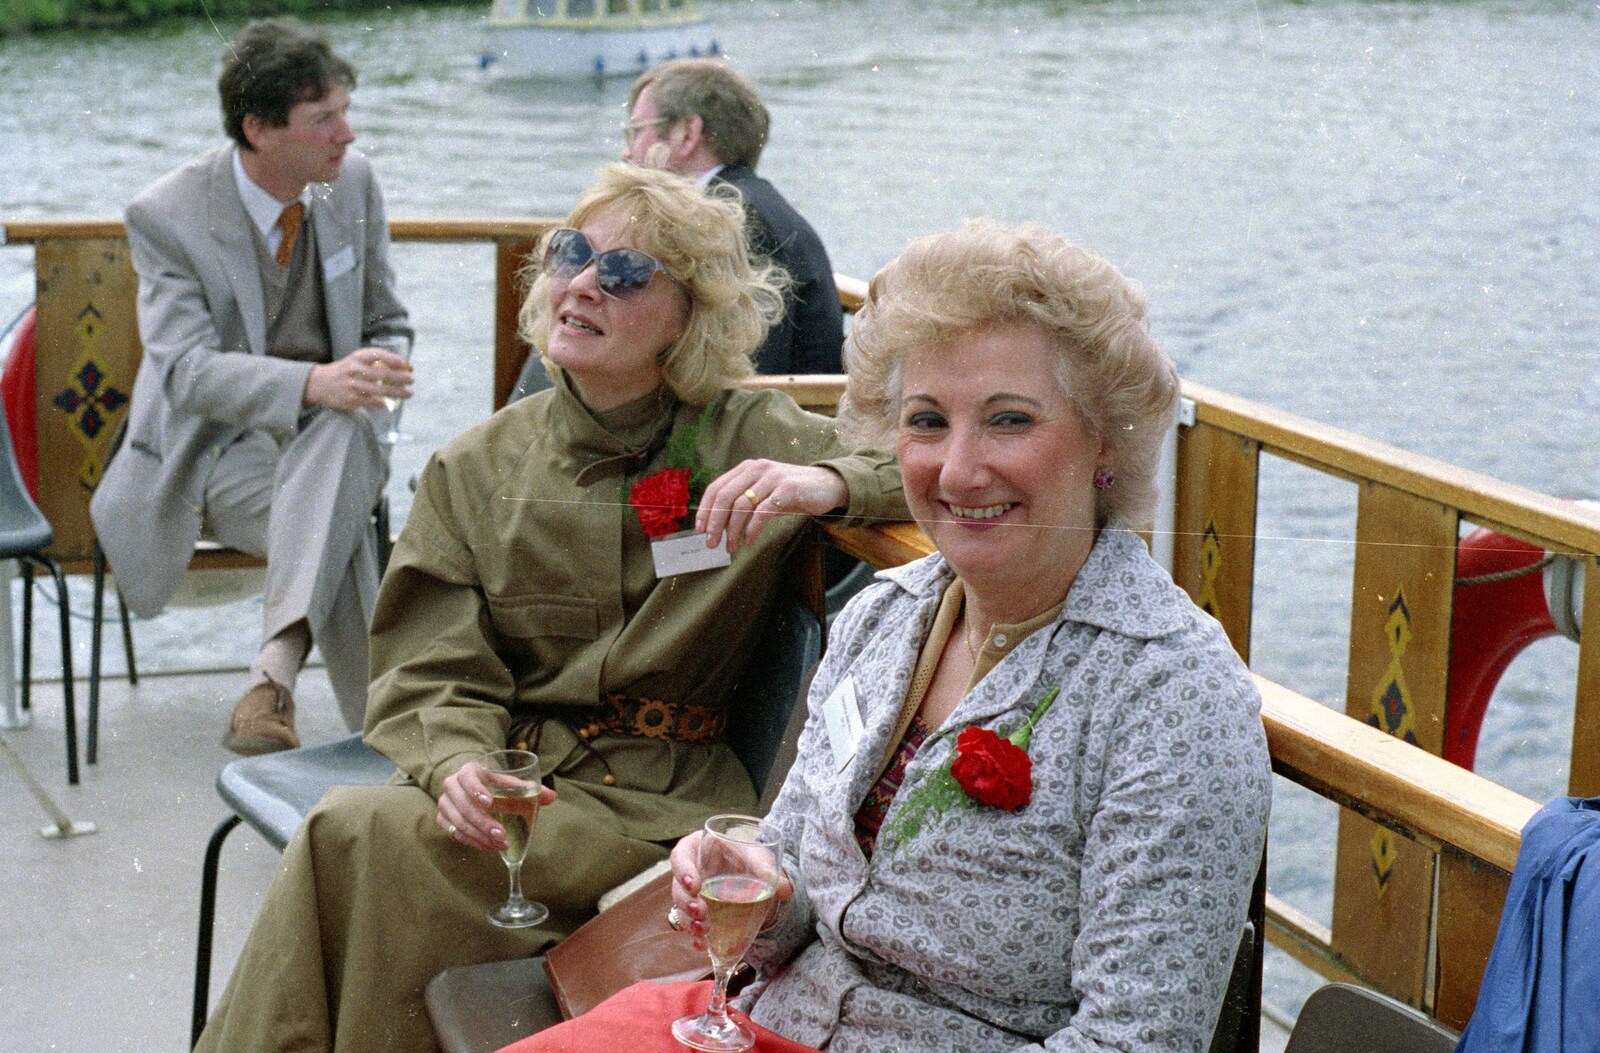 More schmoozing from A Soman-Wherry Press Boat Trip, Horning, The Broads, Norfolk - 8th May 1988